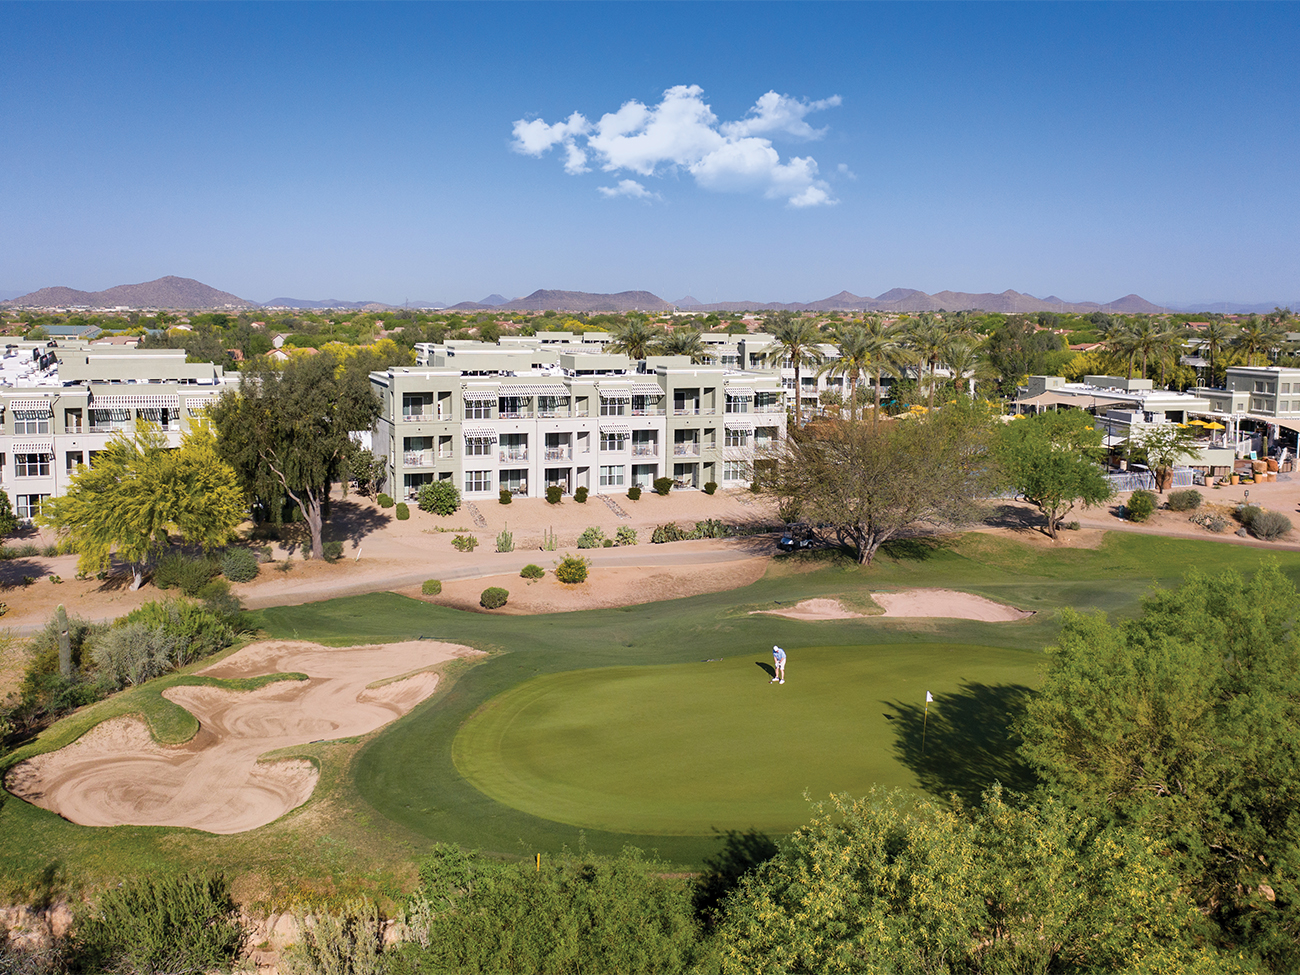 Marriott's Canyon Villas Off property Golf. Marriott's Canyon Villas is located in Phoenix, Arizona United States.